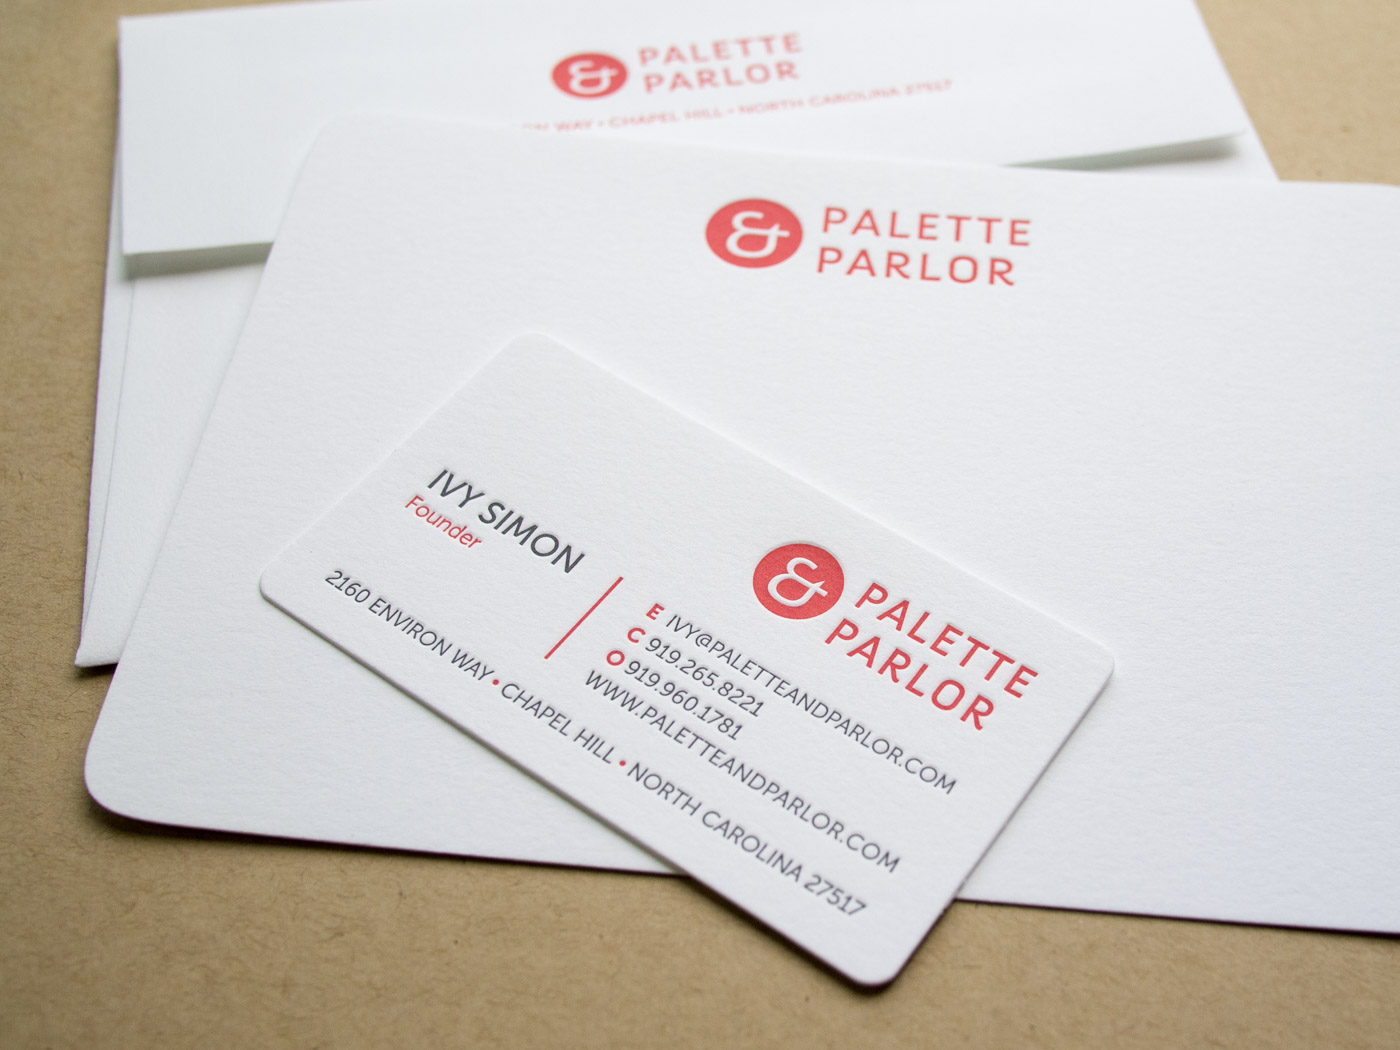 Palette and Parlor | Printed by Parklife Press